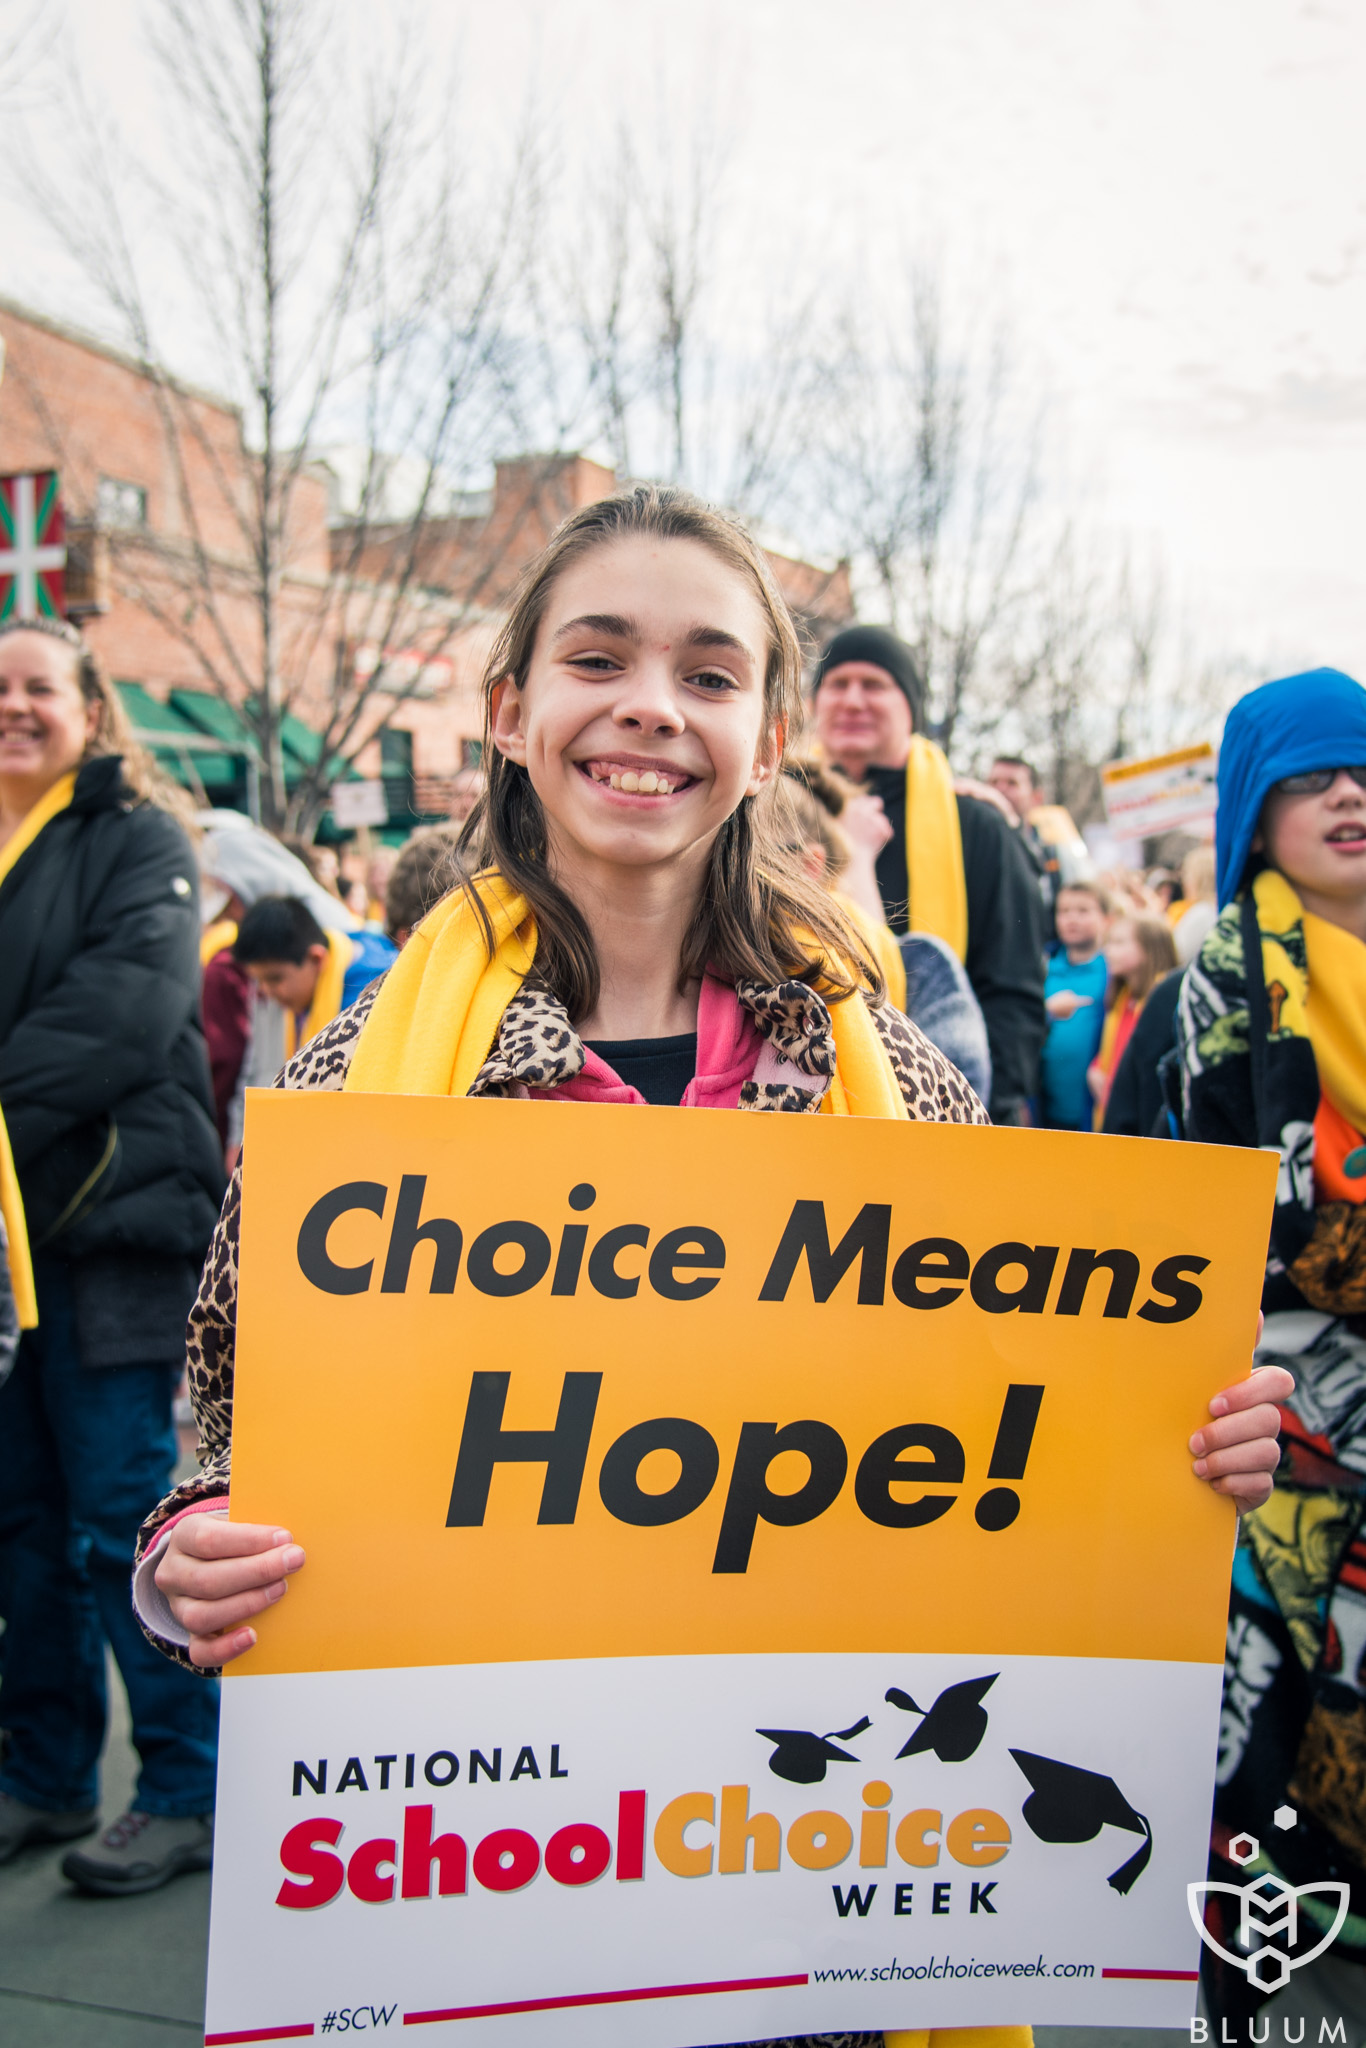 A student holds up a sign that says "Choice Means Hope" for National School Choice Week